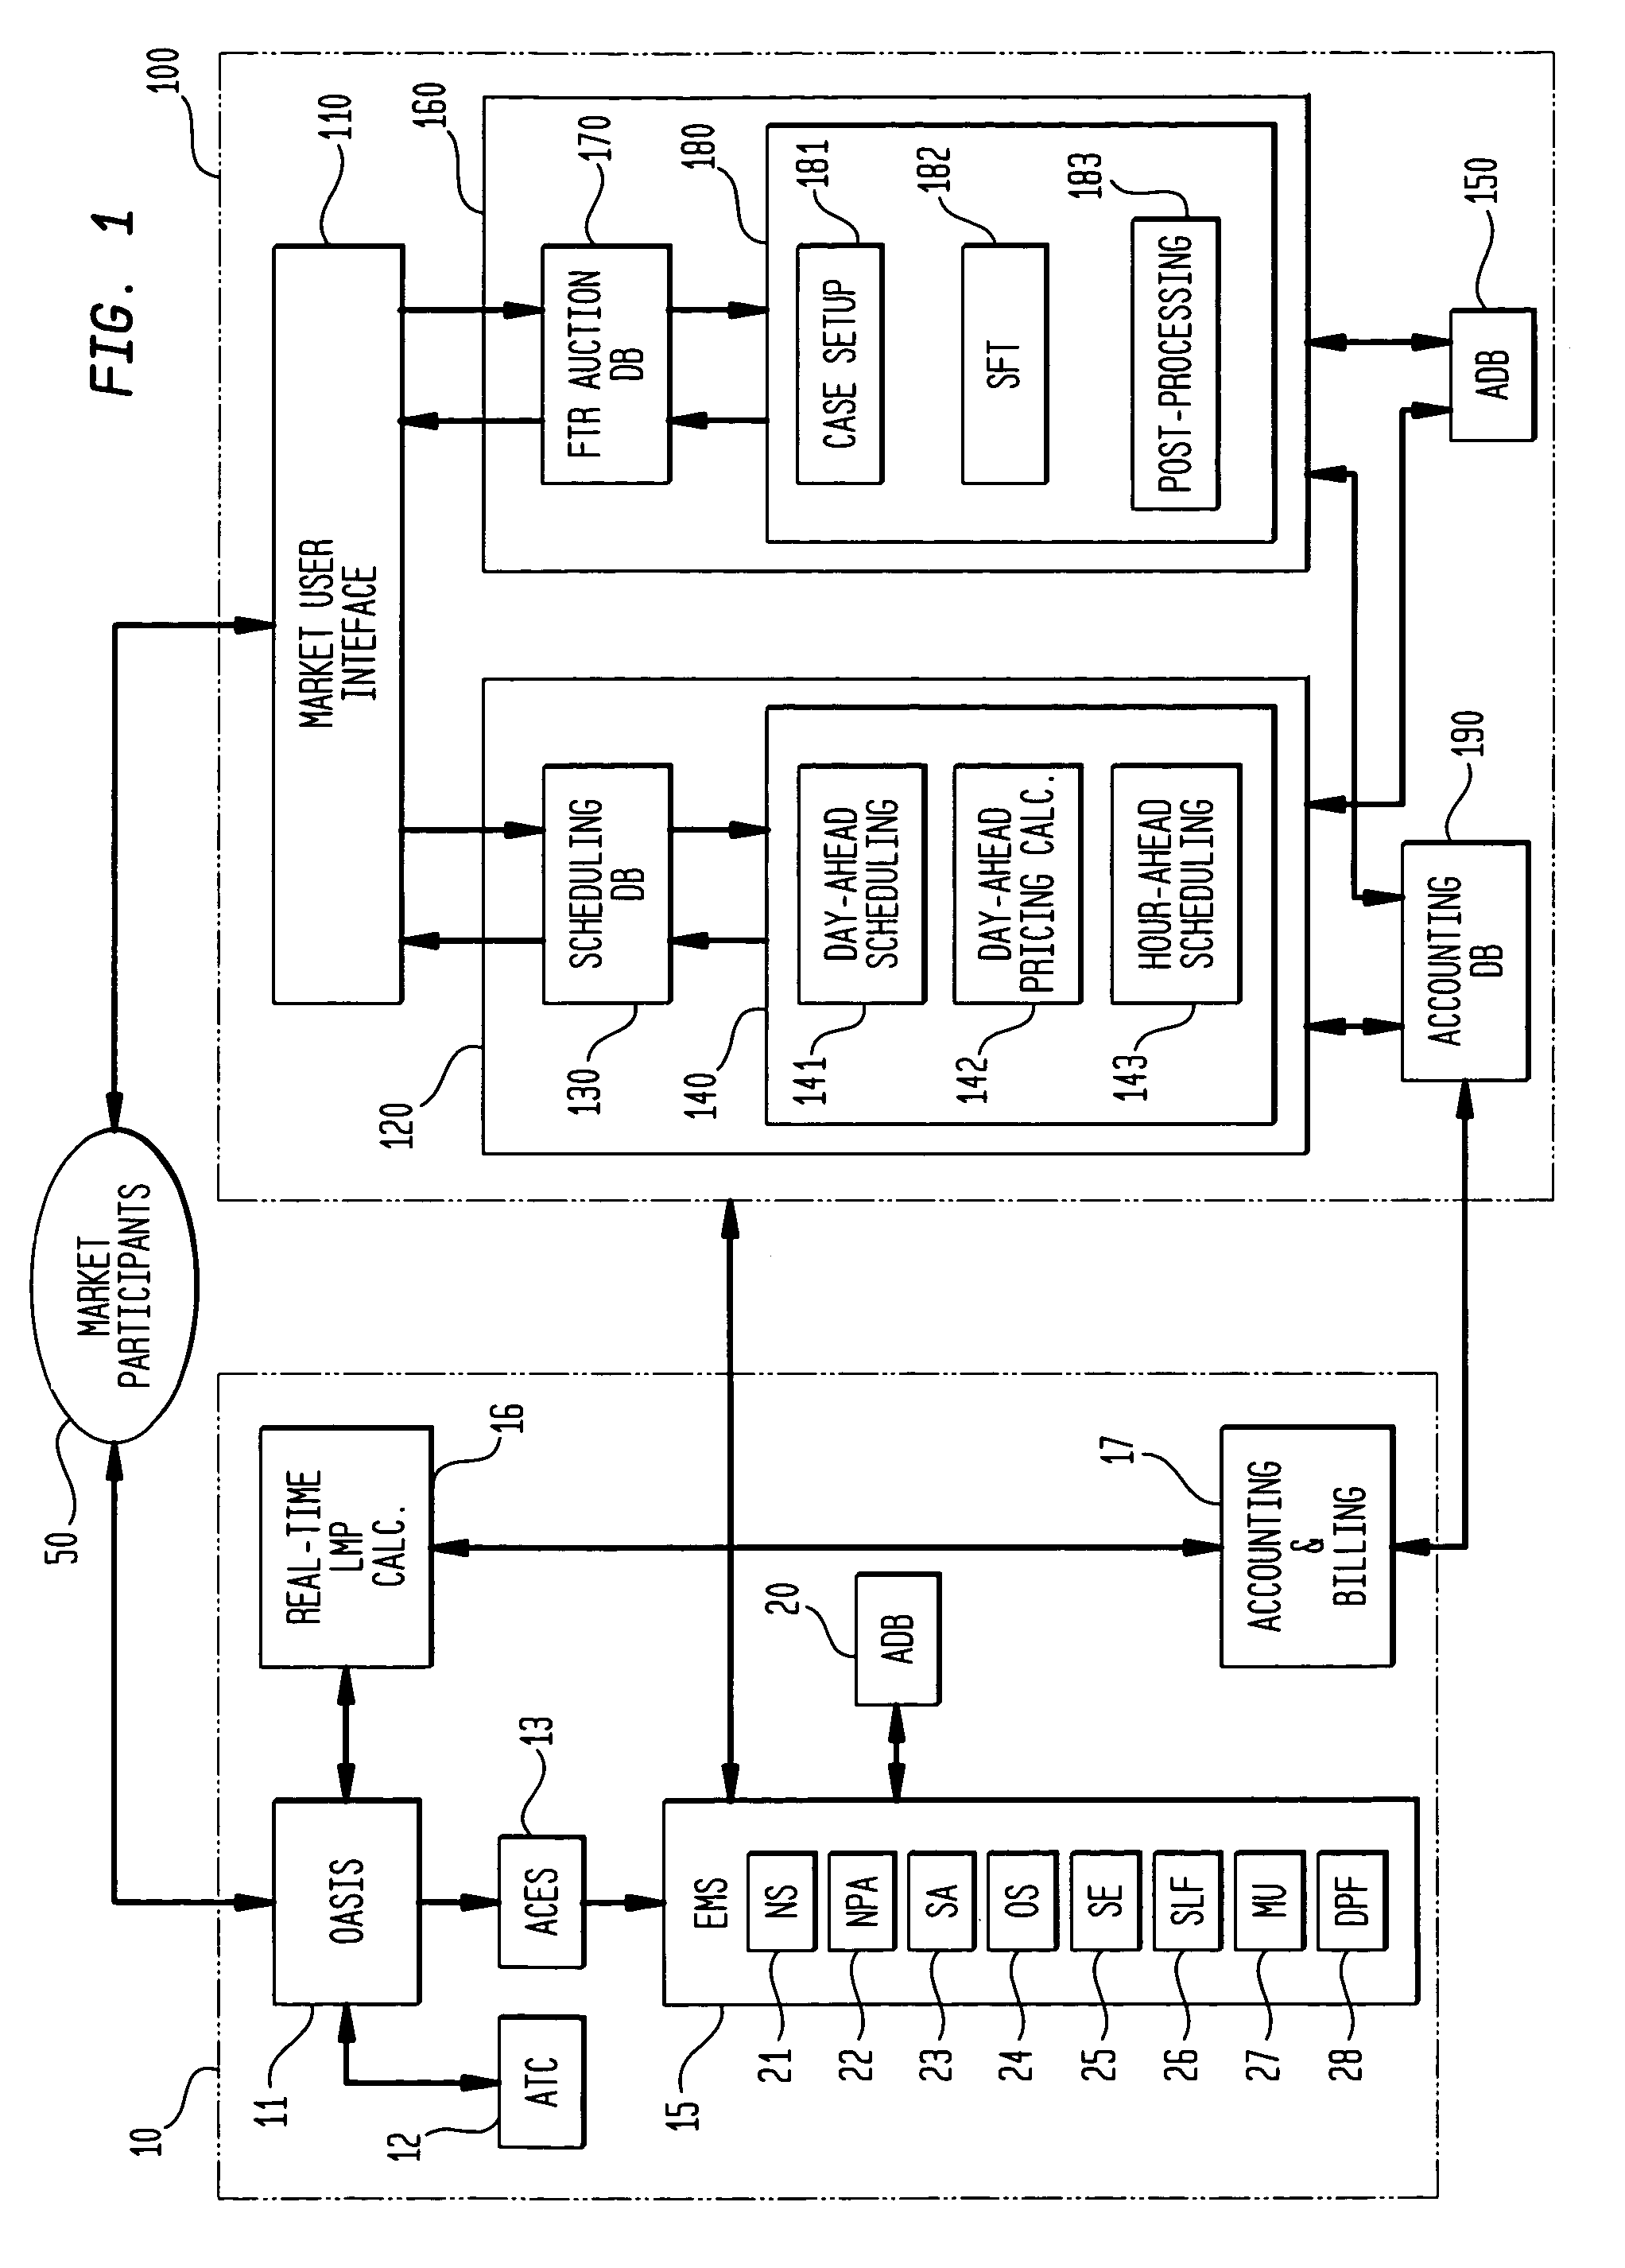 Exchange, scheduling and control system for electrical power